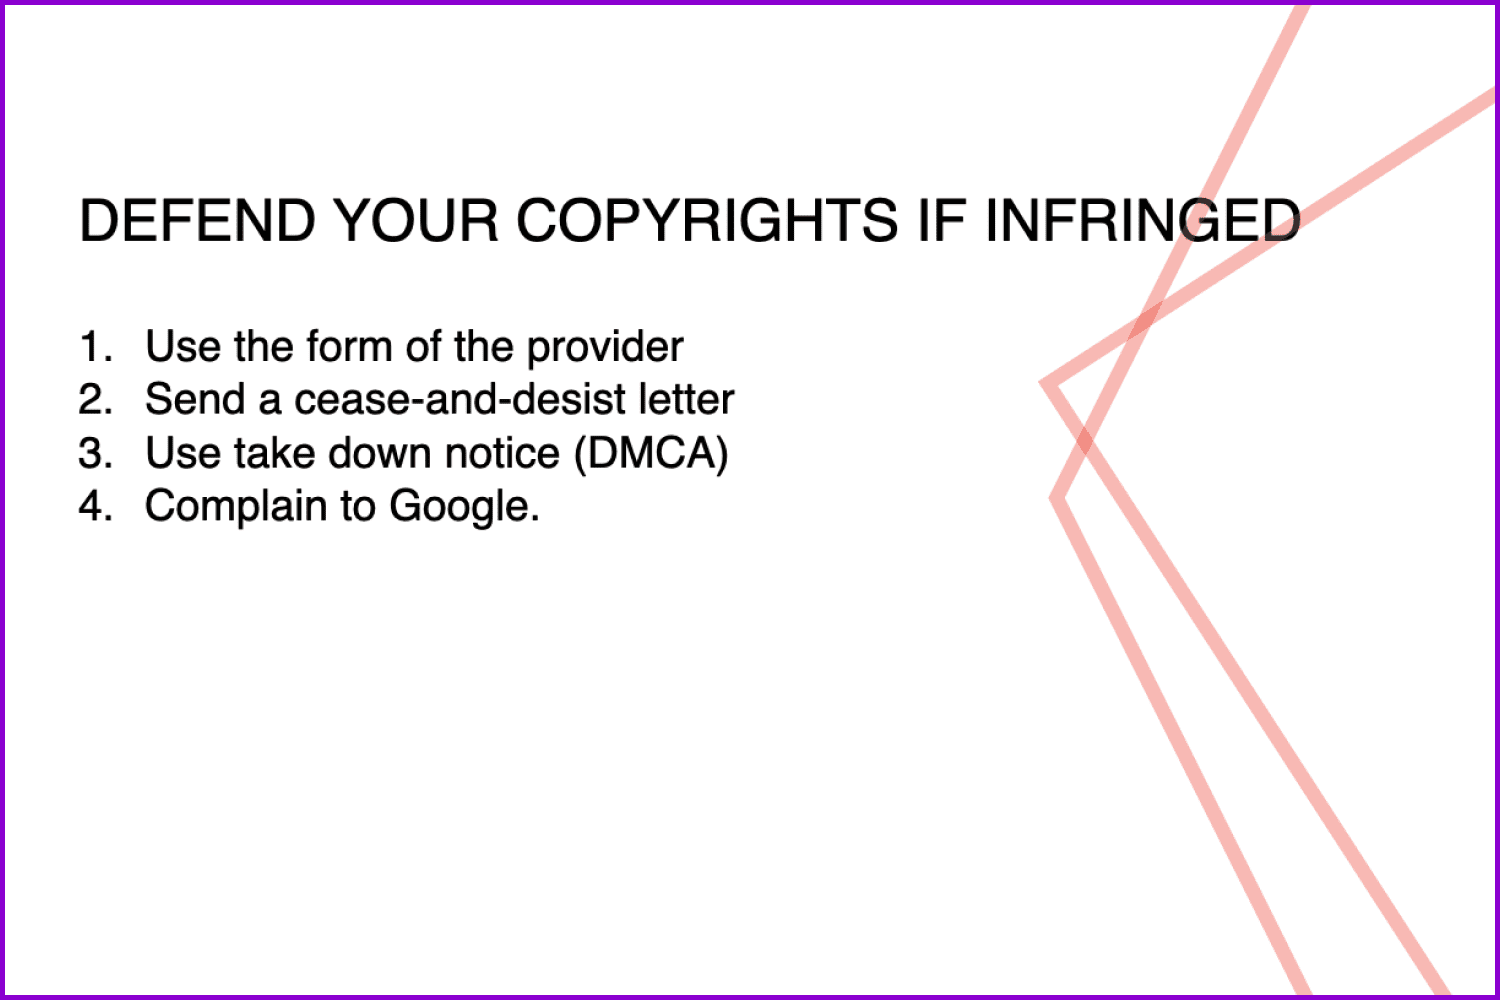 defend your copyrights if infringed.